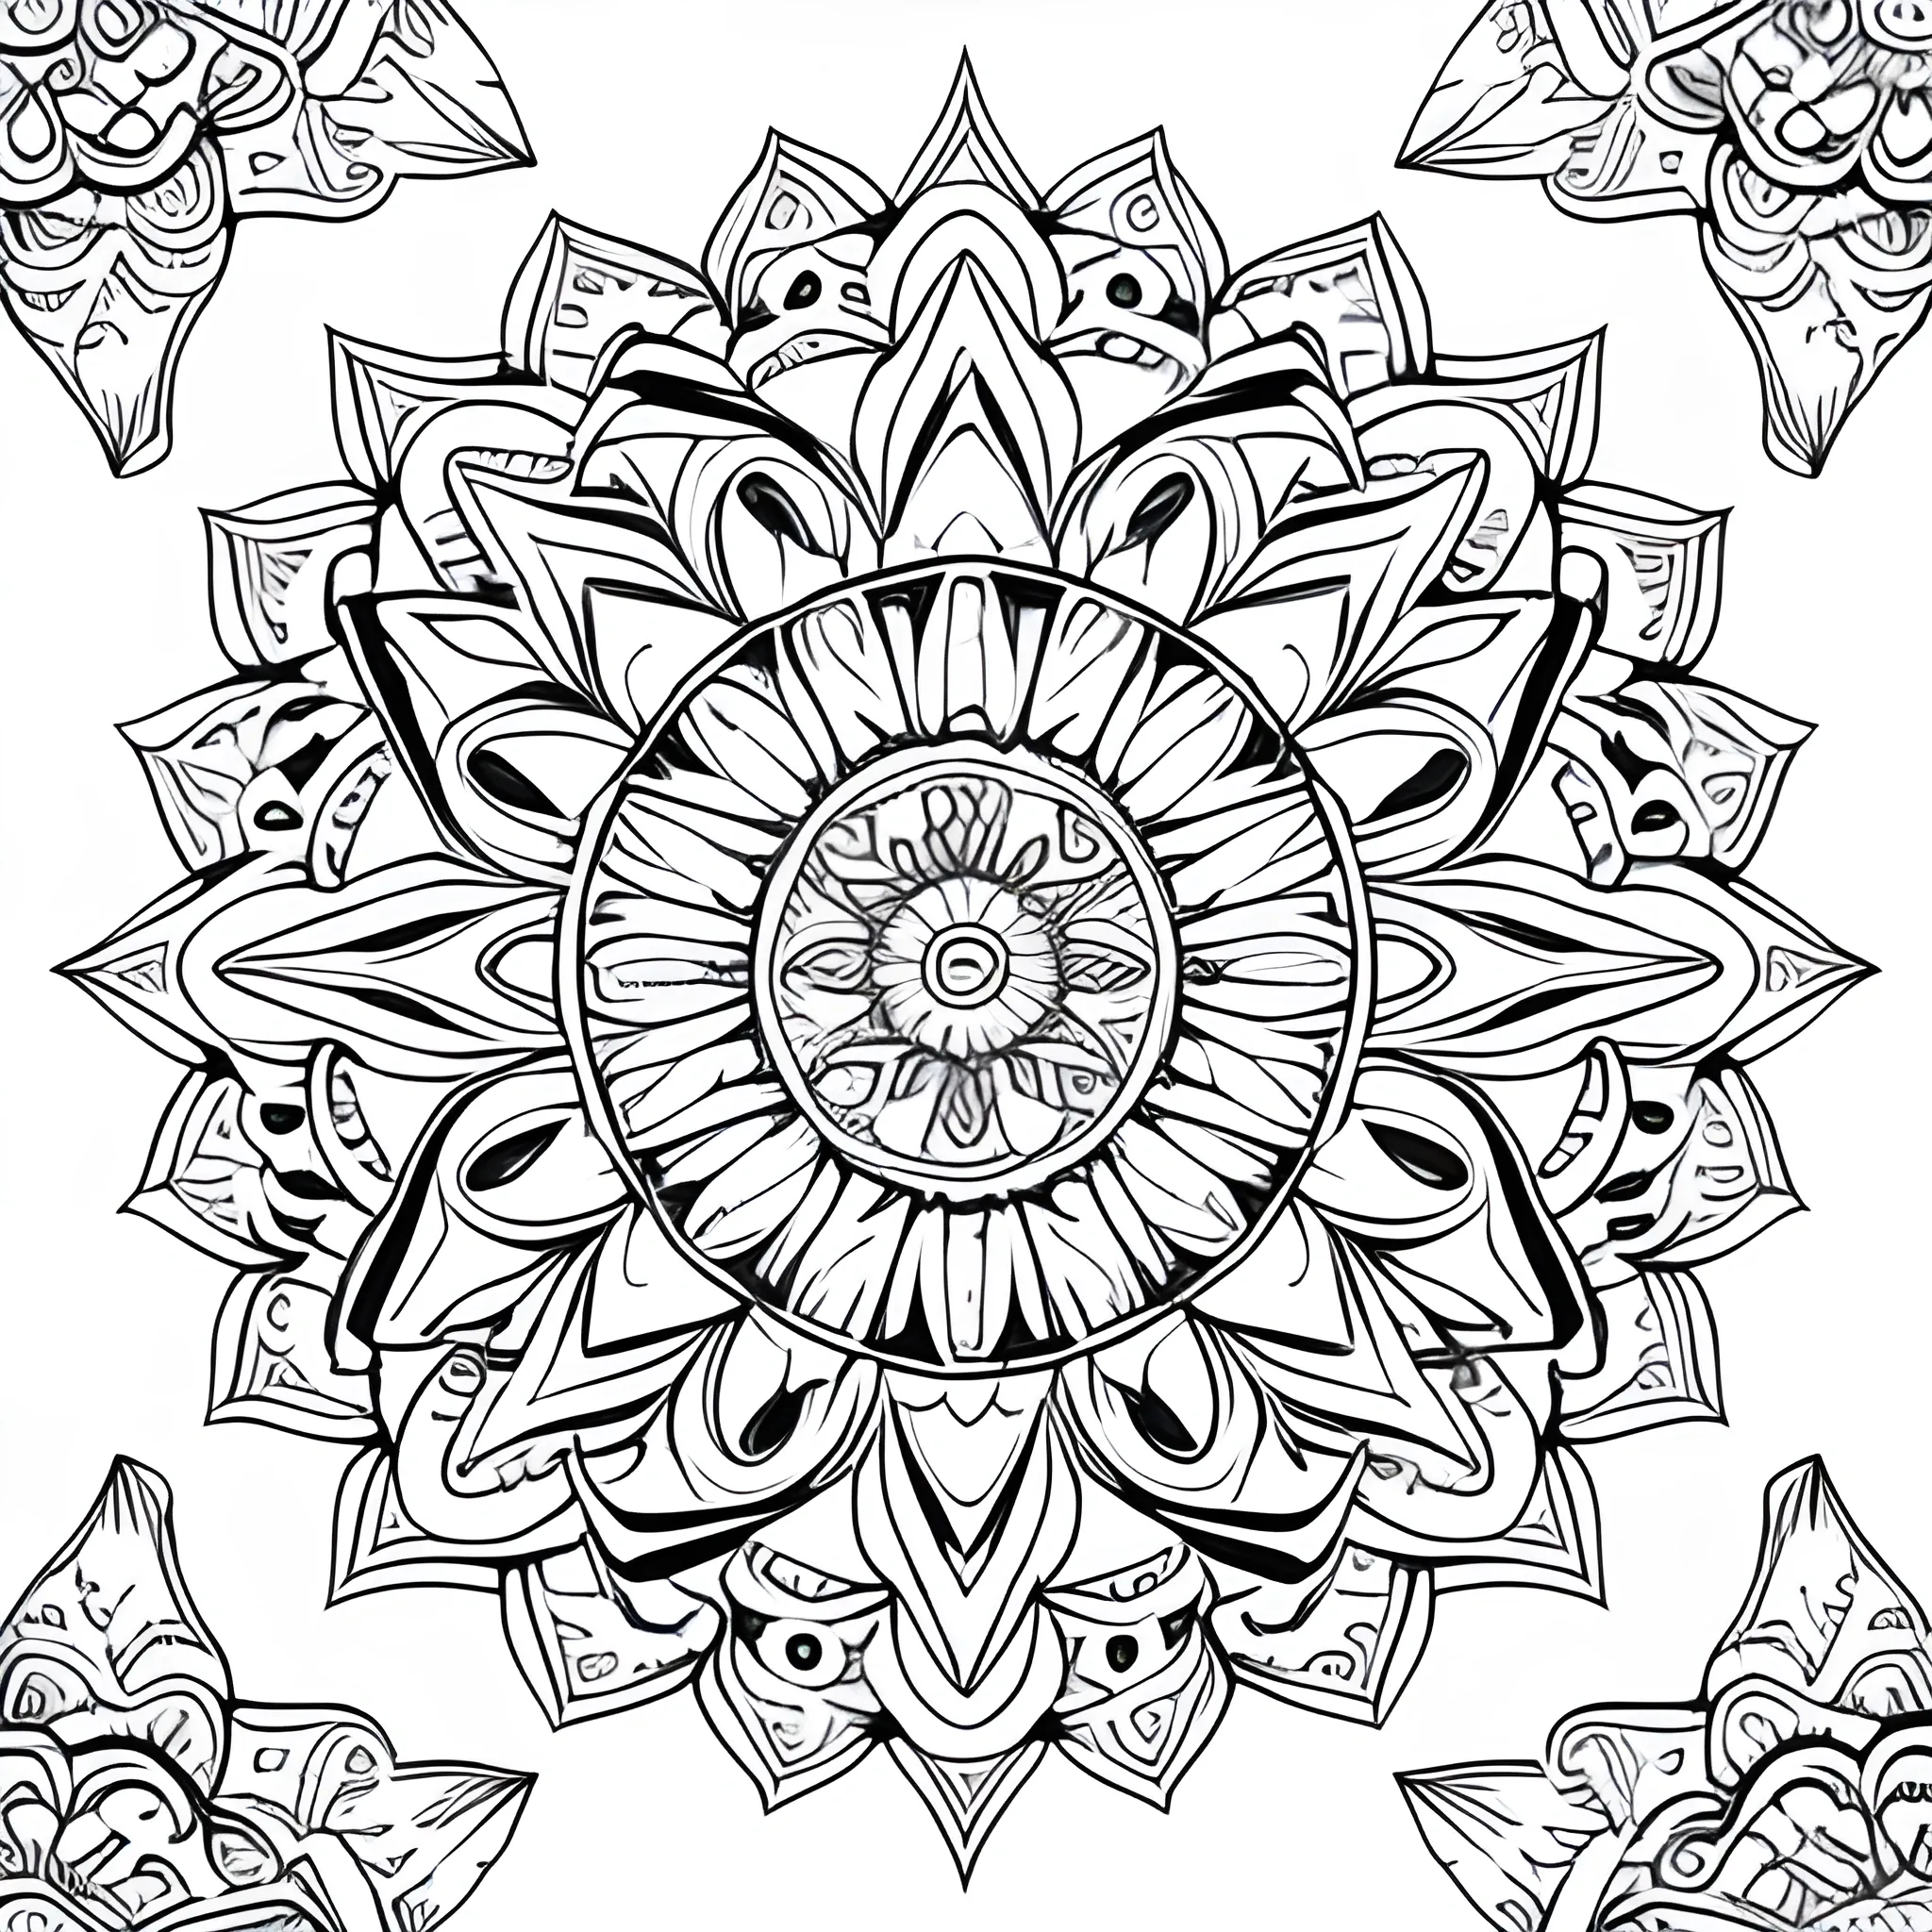 mandala white background, full body, picture, coloring book style on white background, well composed, clean coloring book page, No dither, no gradient, strong outline, No fill, No solids, vector illustration